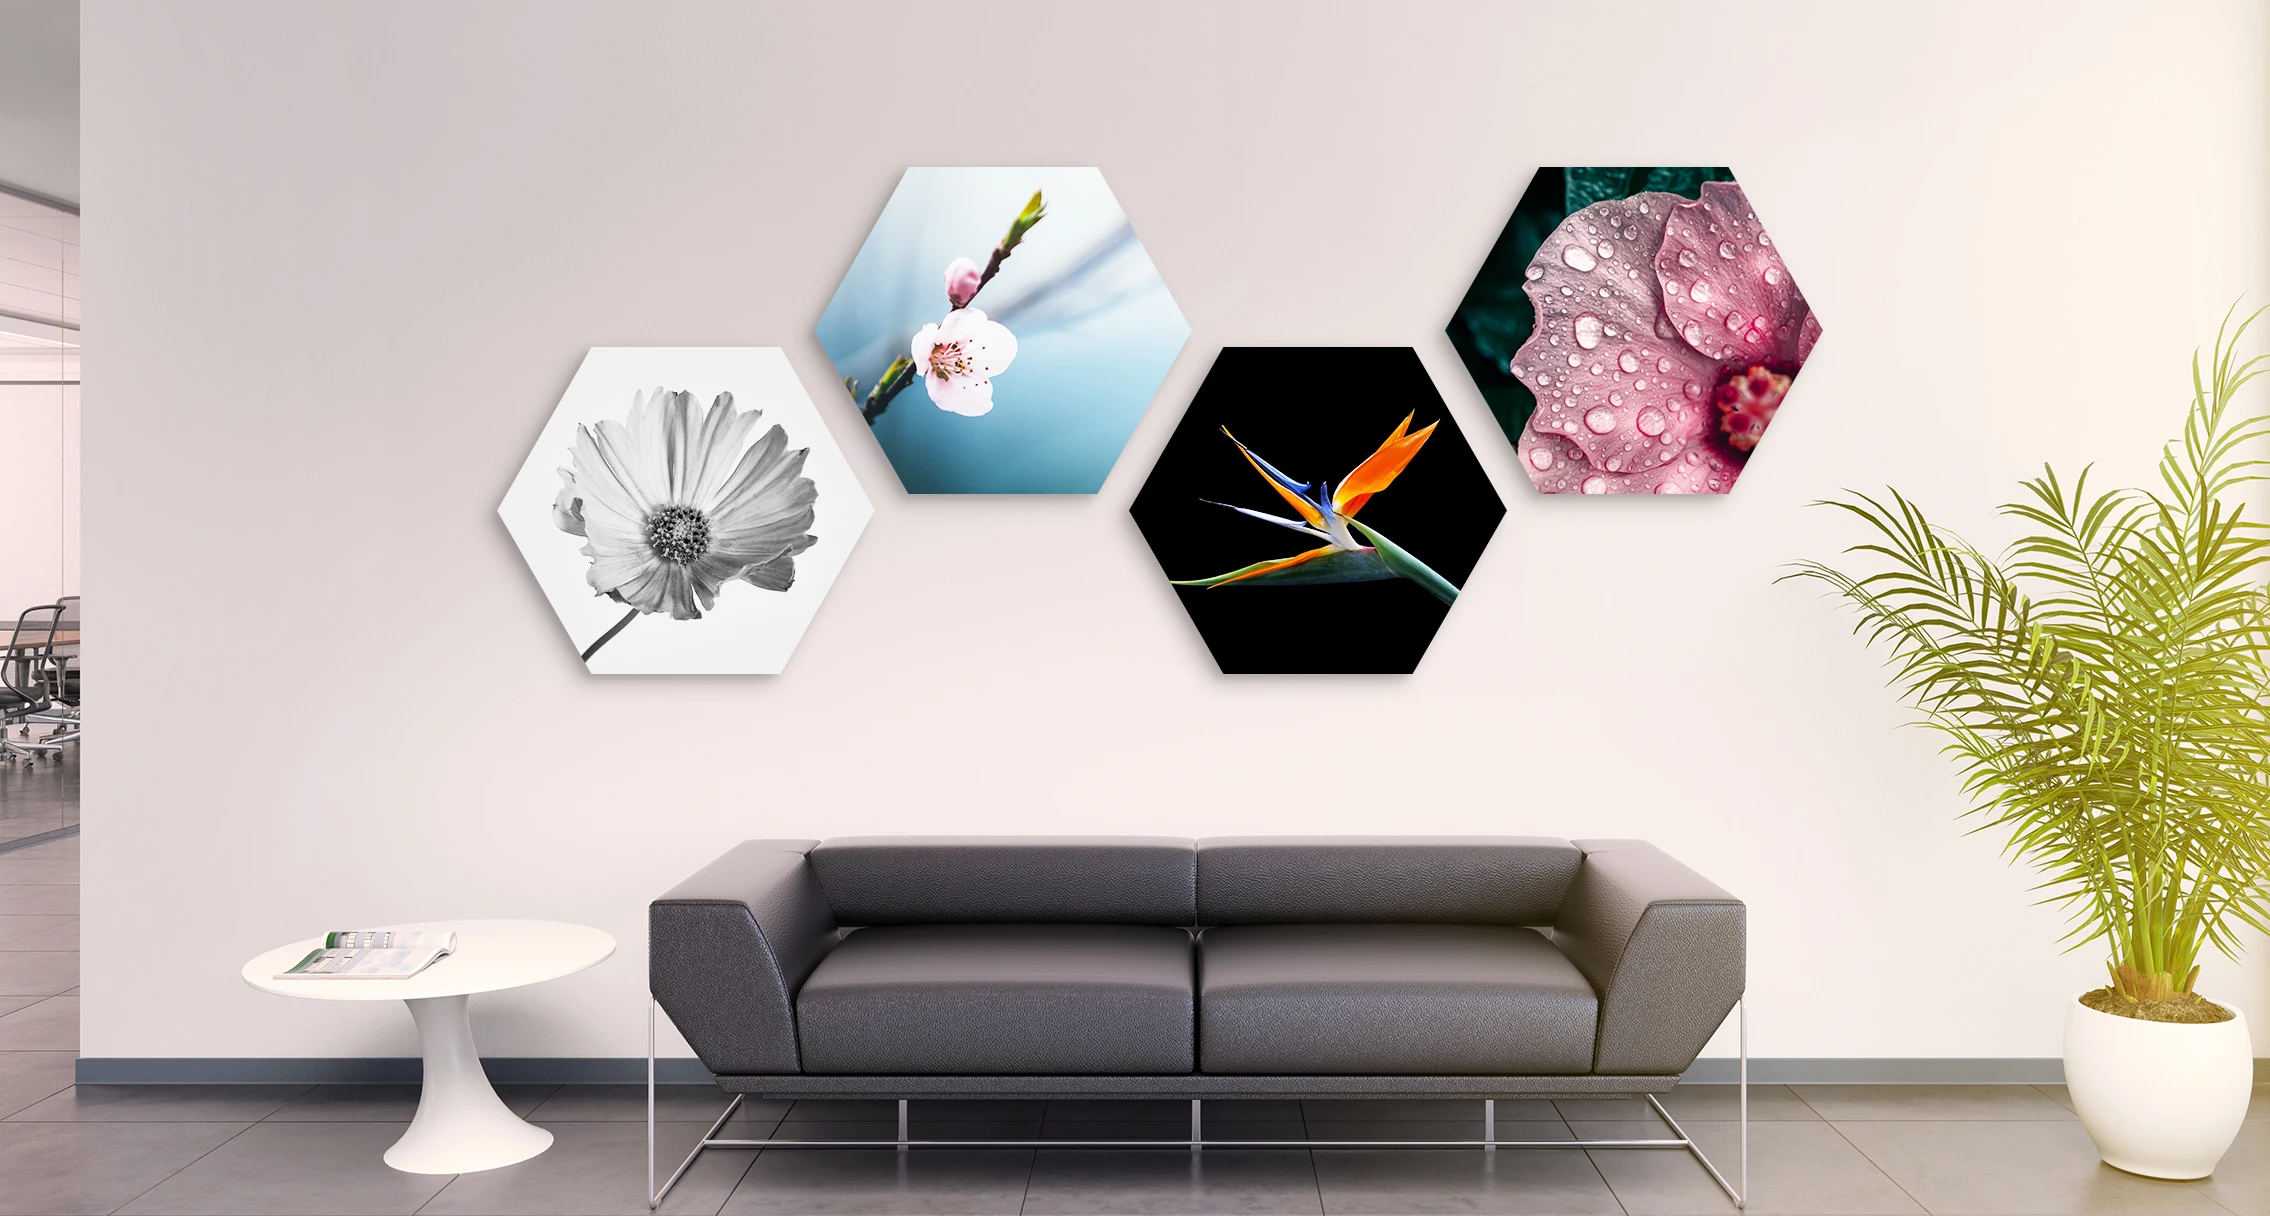 5 different flower motifs in hexagon format hang on a wall in a living room.